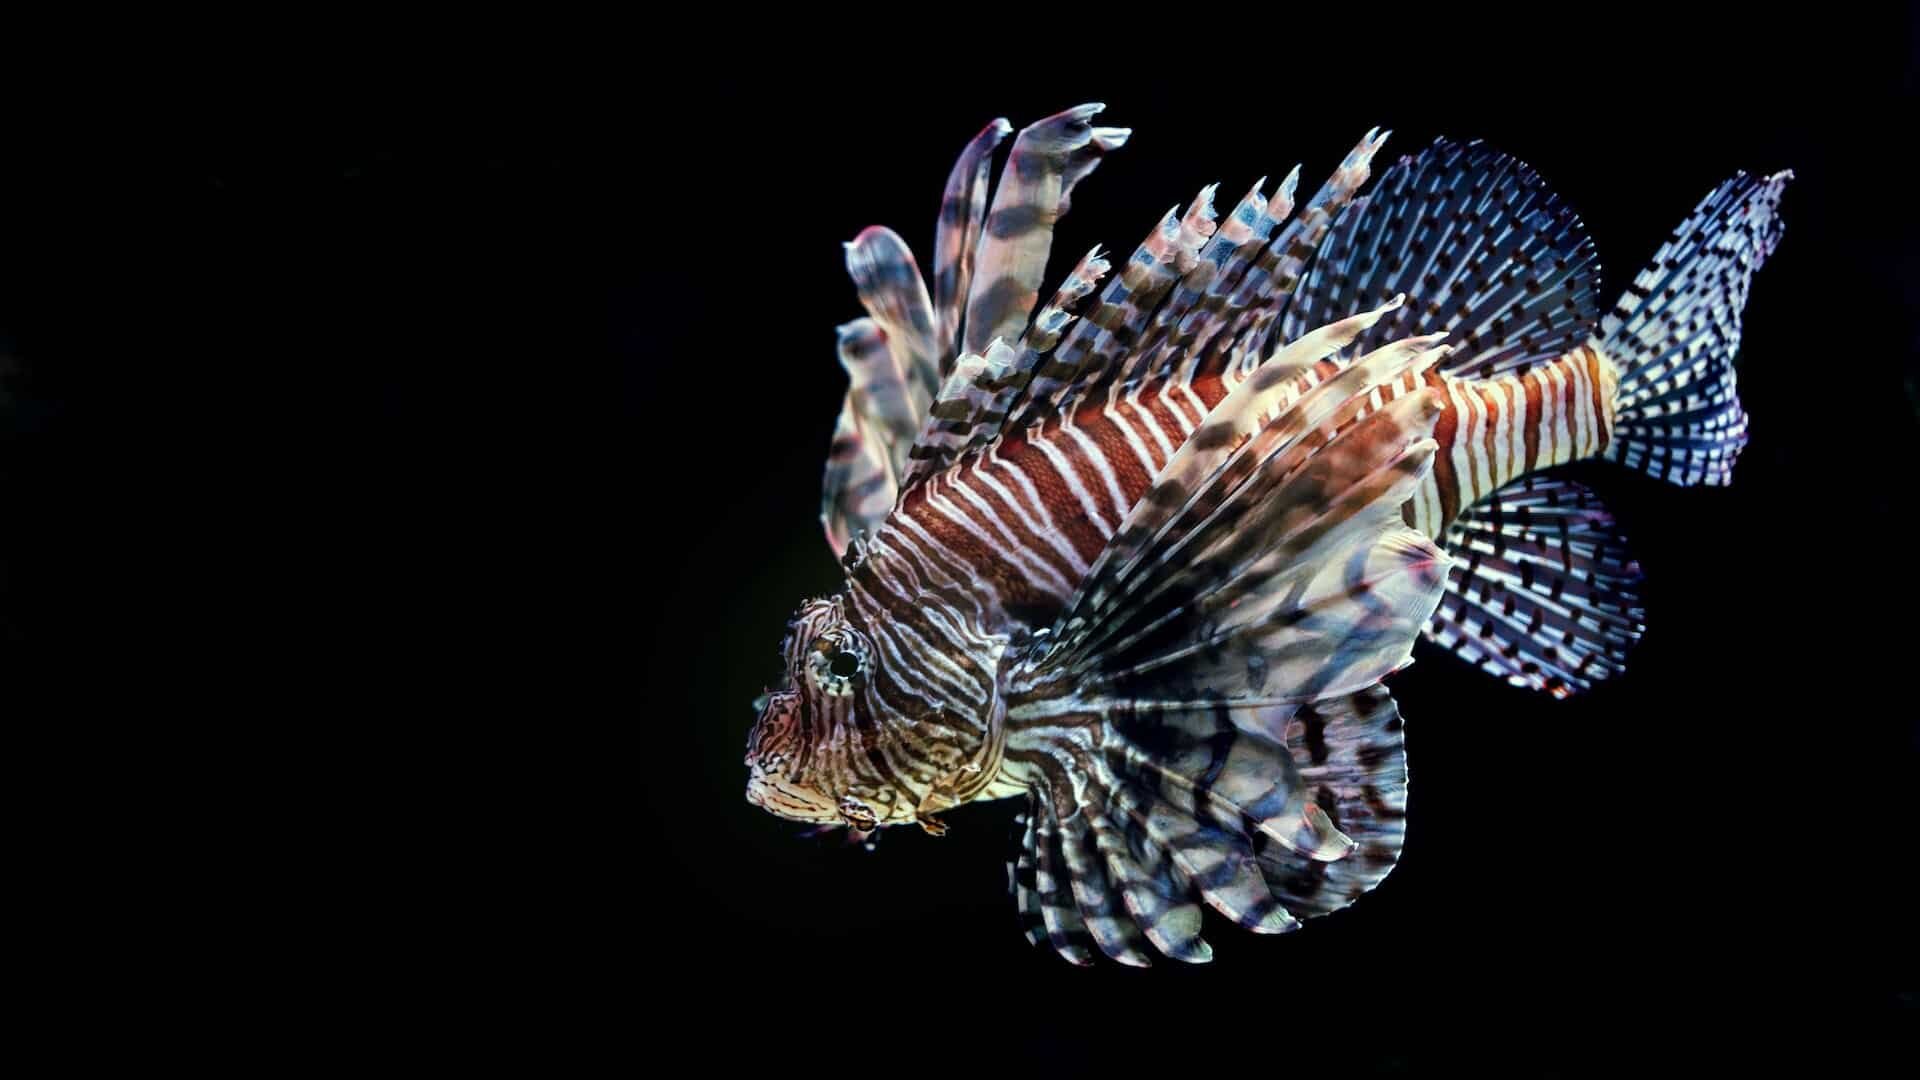 #Why researchers are interested in keeping (some) lionfish healthy